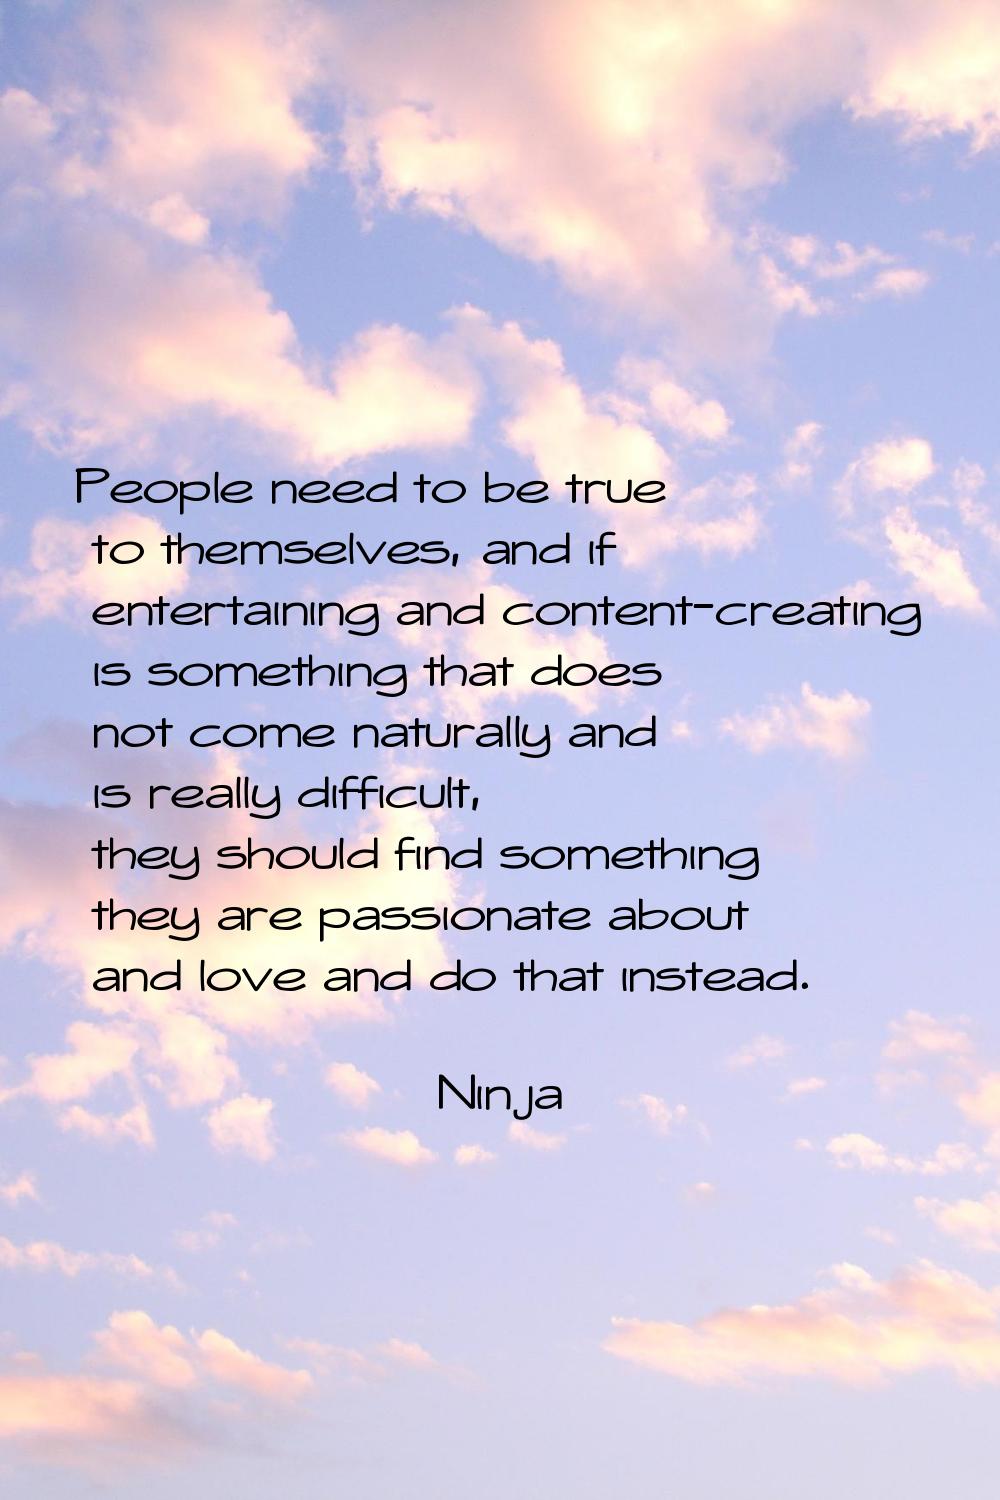 People need to be true to themselves, and if entertaining and content-creating is something that do